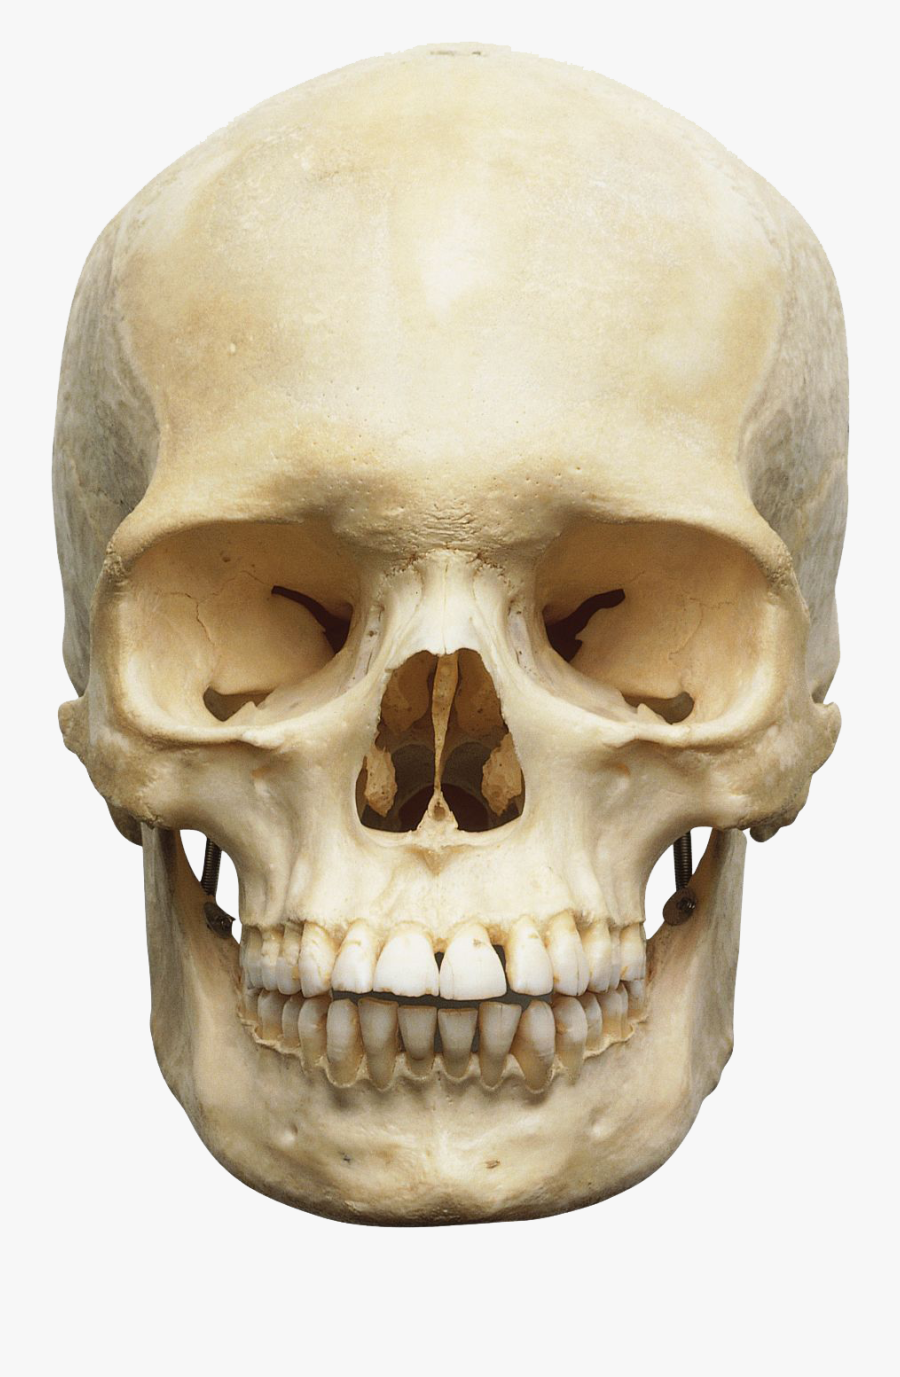 Download Skeleton Head Free Png Photo Images And Clipart - Skeleton Head Png, Transparent Clipart